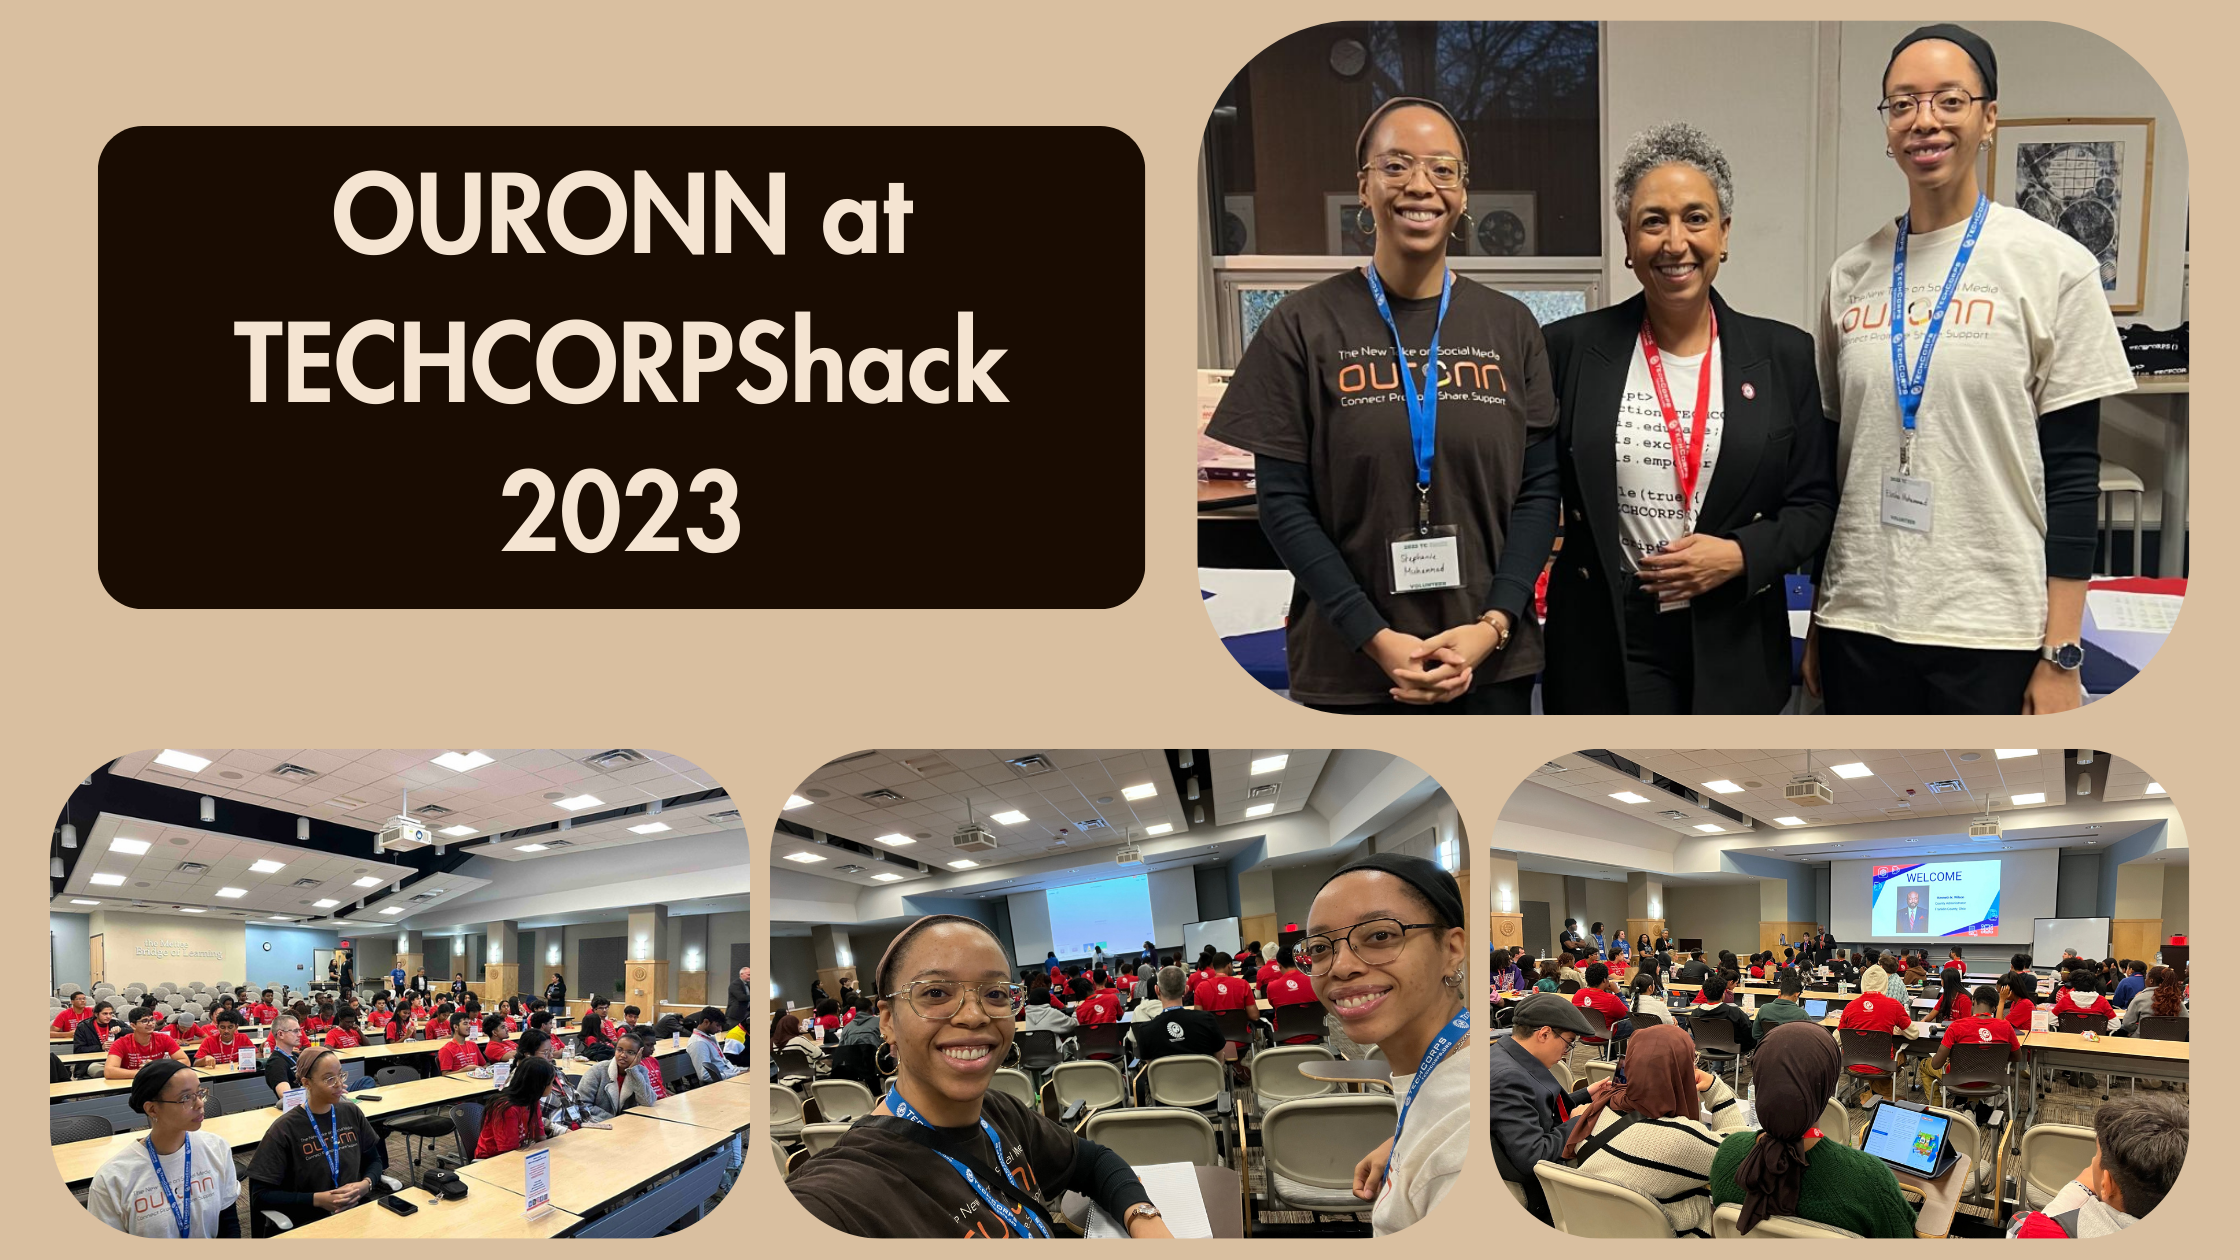 "OURONN at TECHCORPShack 2023!" Cover Image